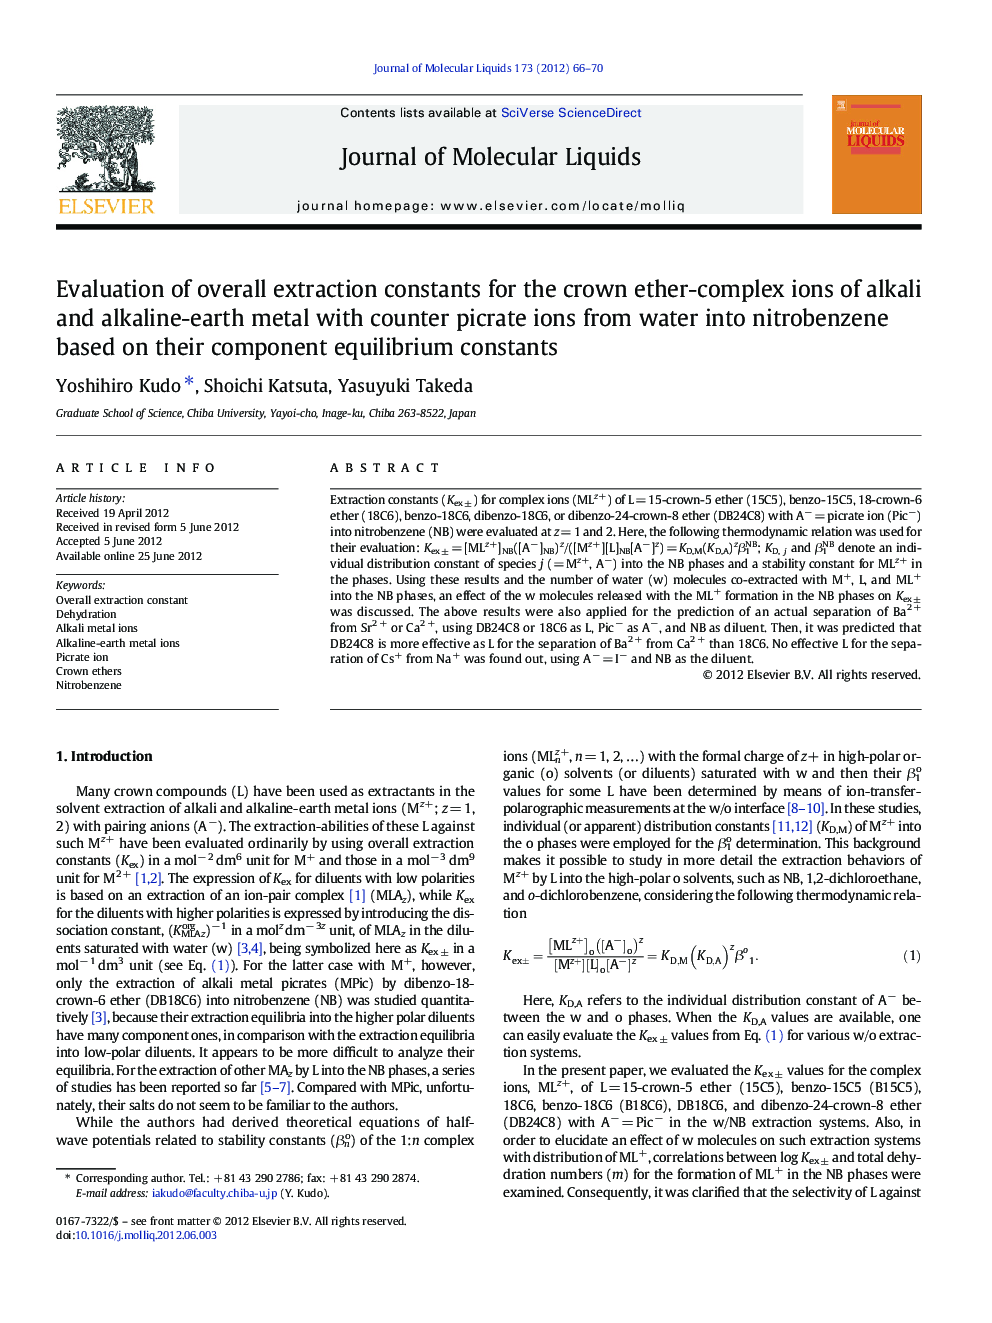 Evaluation of overall extraction constants for the crown ether-complex ions of alkali and alkaline-earth metal with counter picrate ions from water into nitrobenzene based on their component equilibrium constants